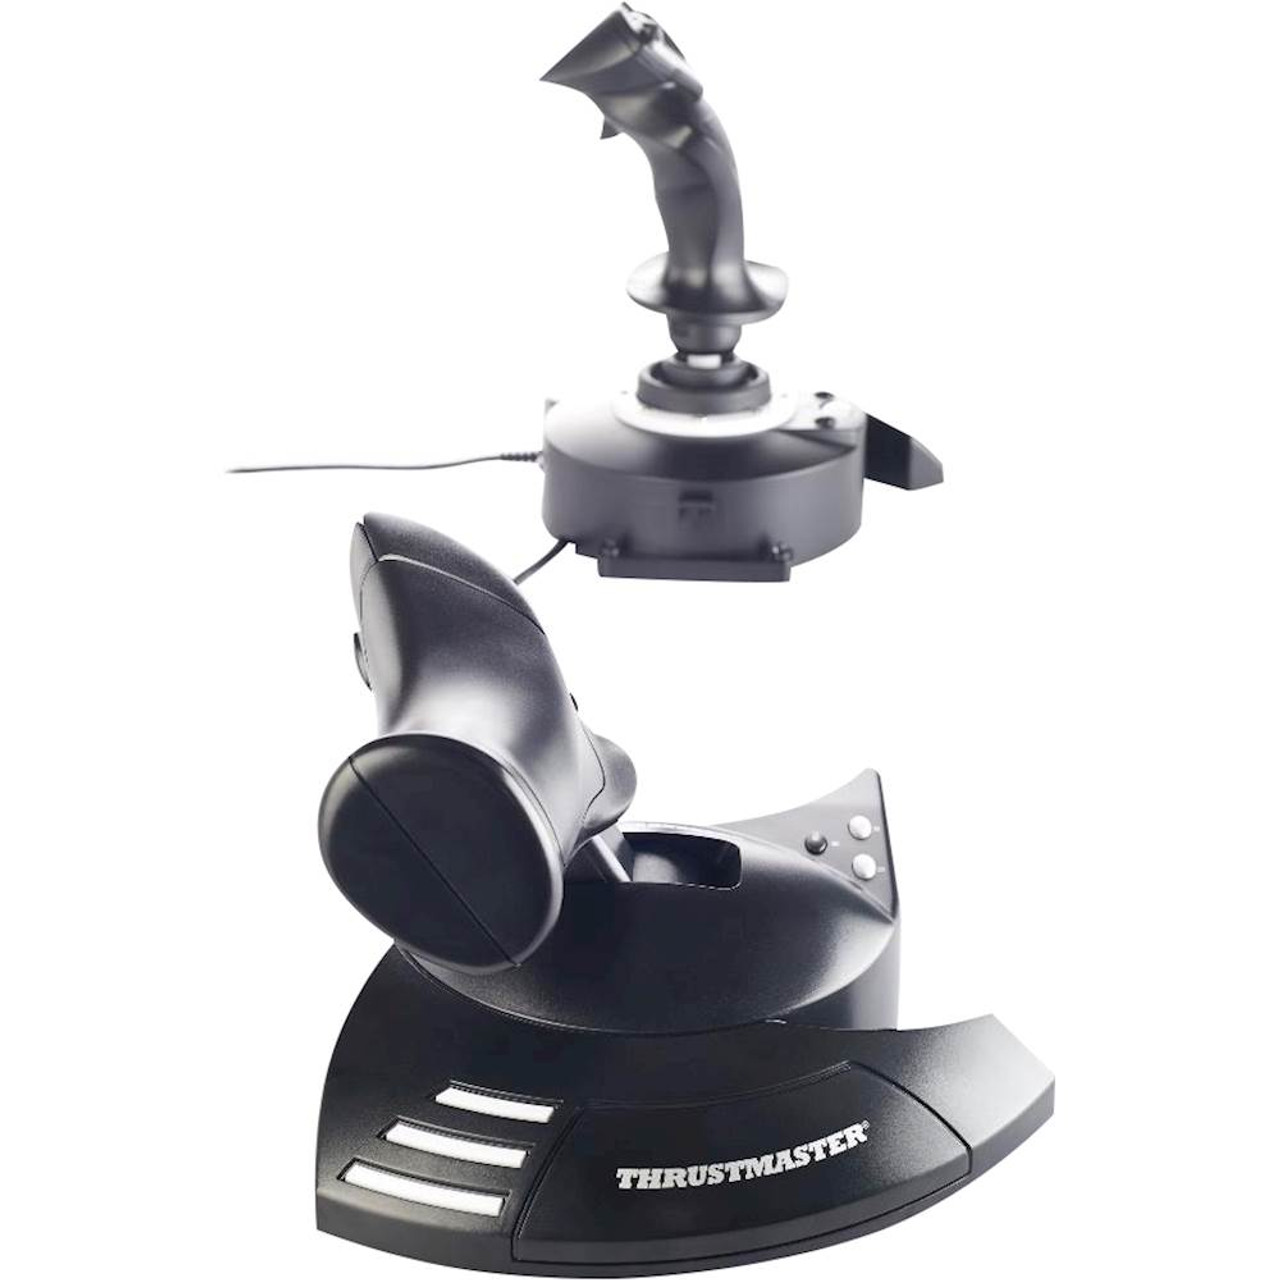 Thrustmaster - T.Flight Hotas One Flight Stick for Xbox One & PC